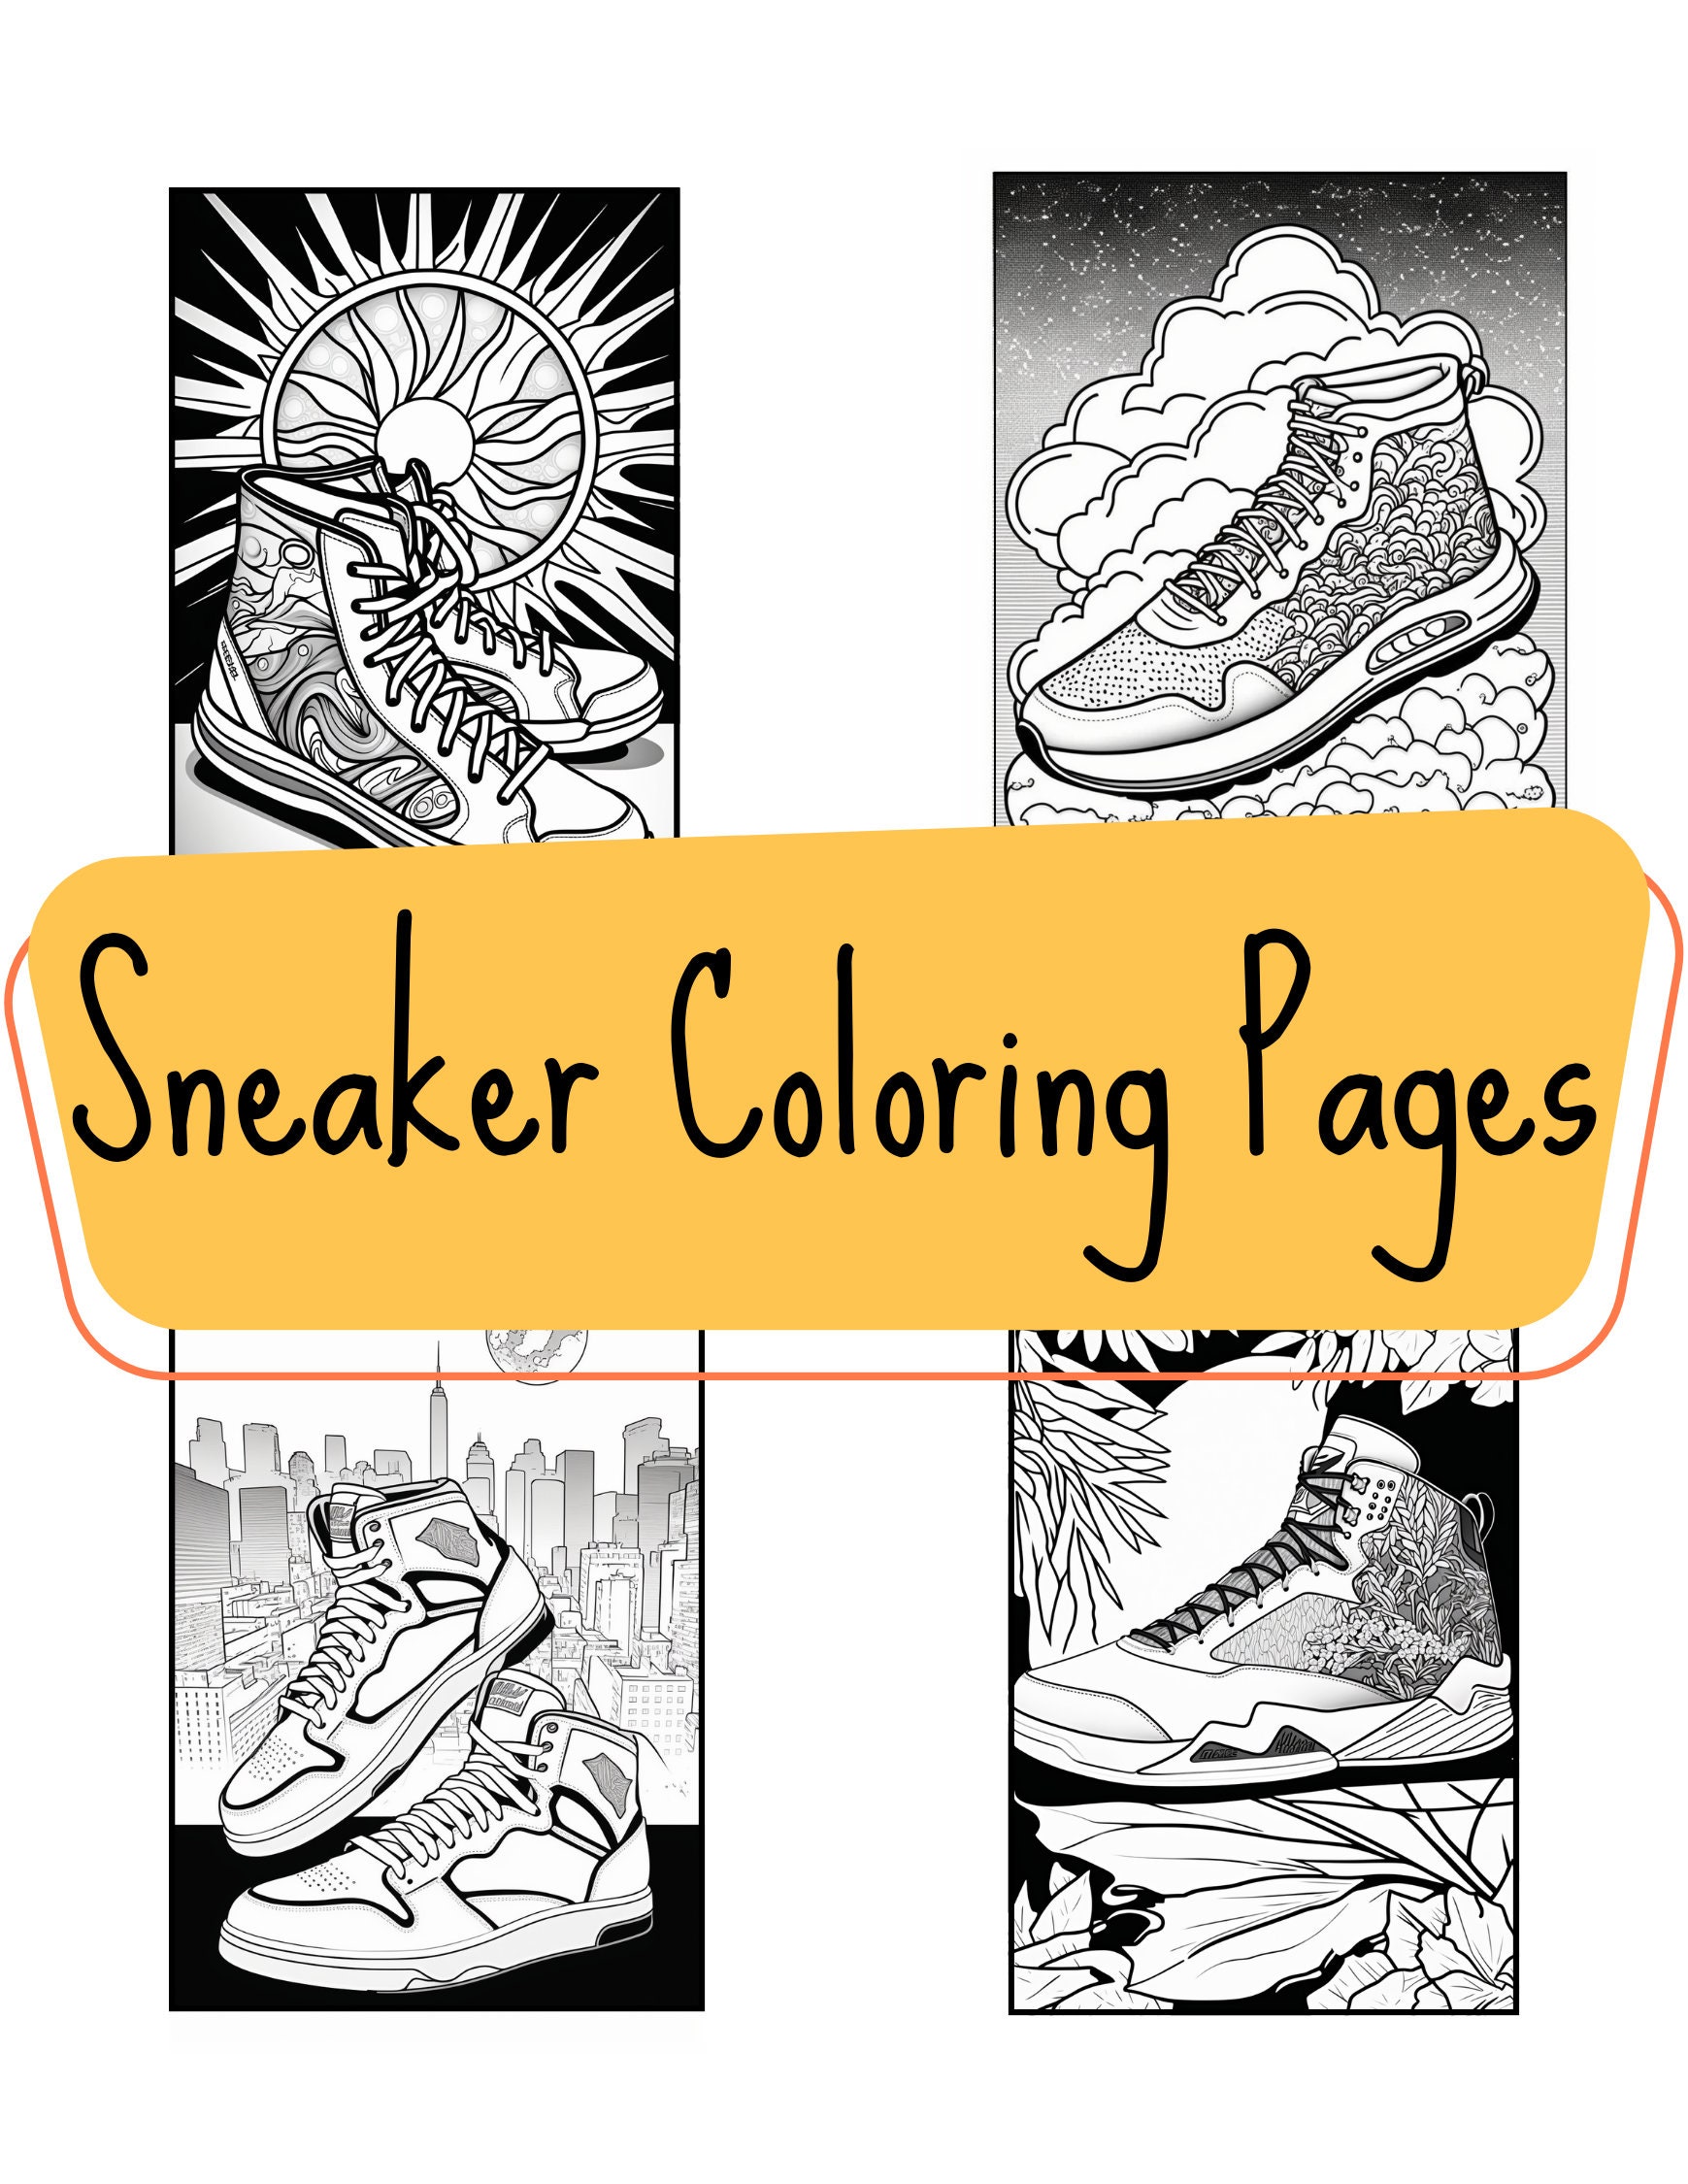 Sneaker Coloring Pages, Set of 10 Sneaker Themed Downloadable Printable ...